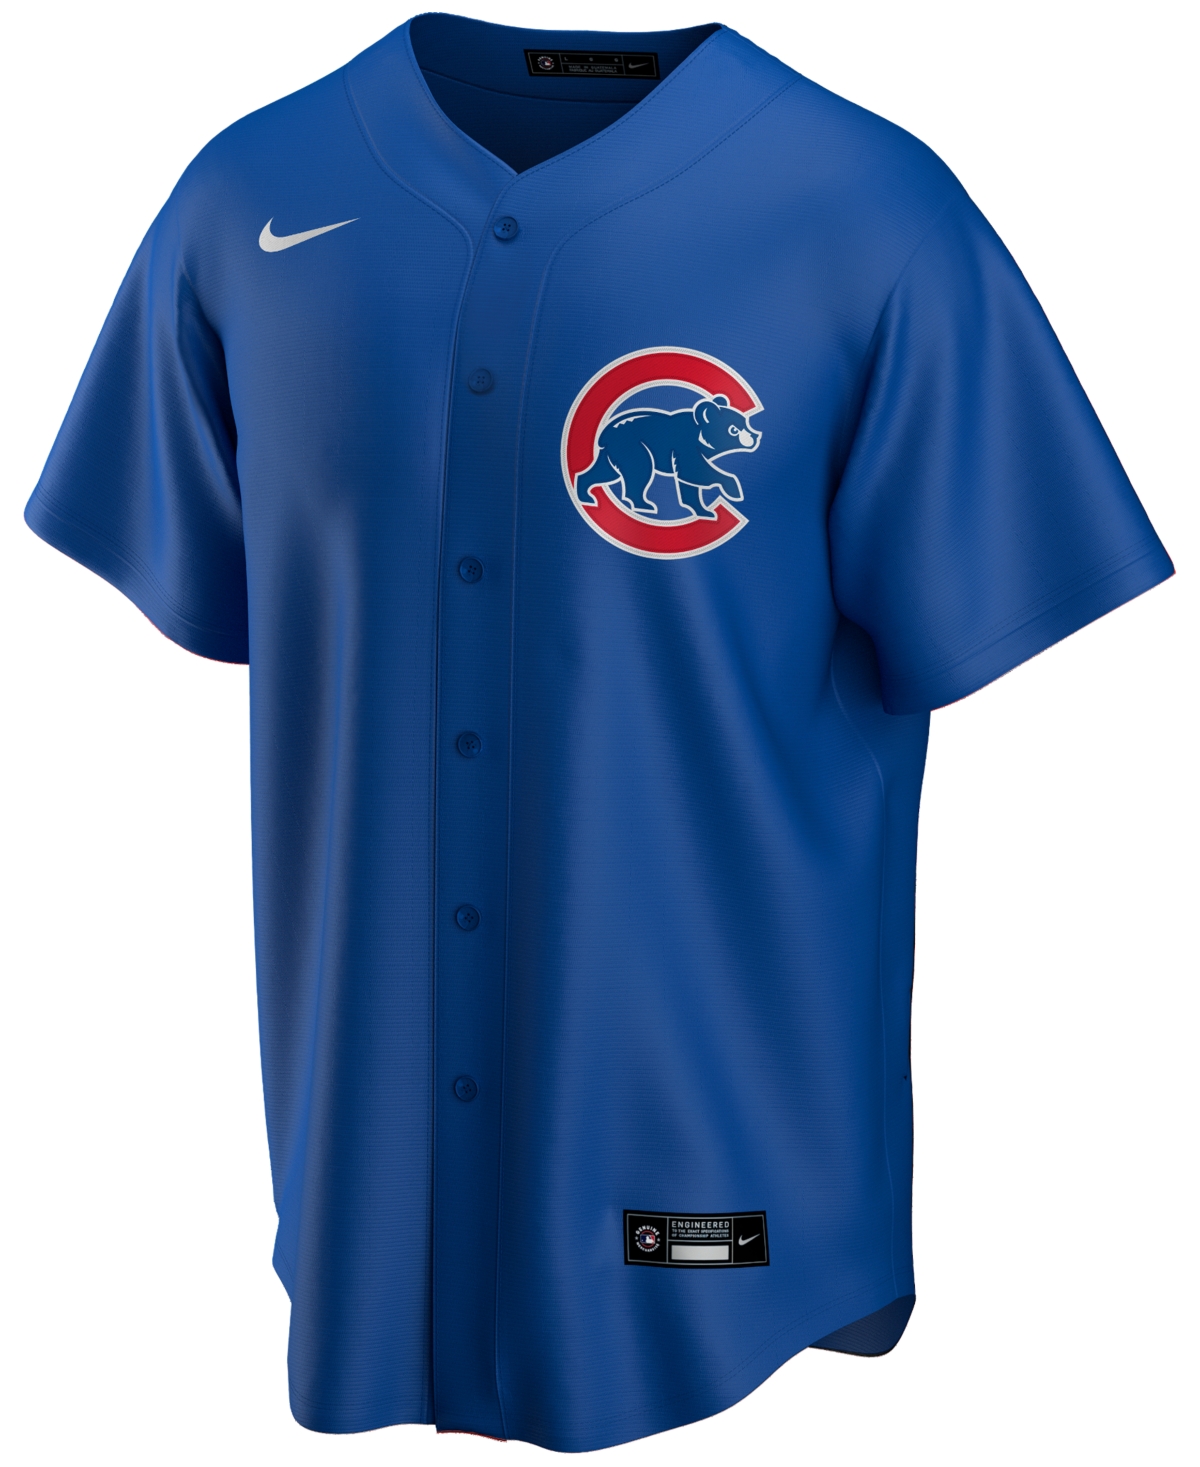 Nike Men's Chicago Cubs Official Blank Replica Jersey